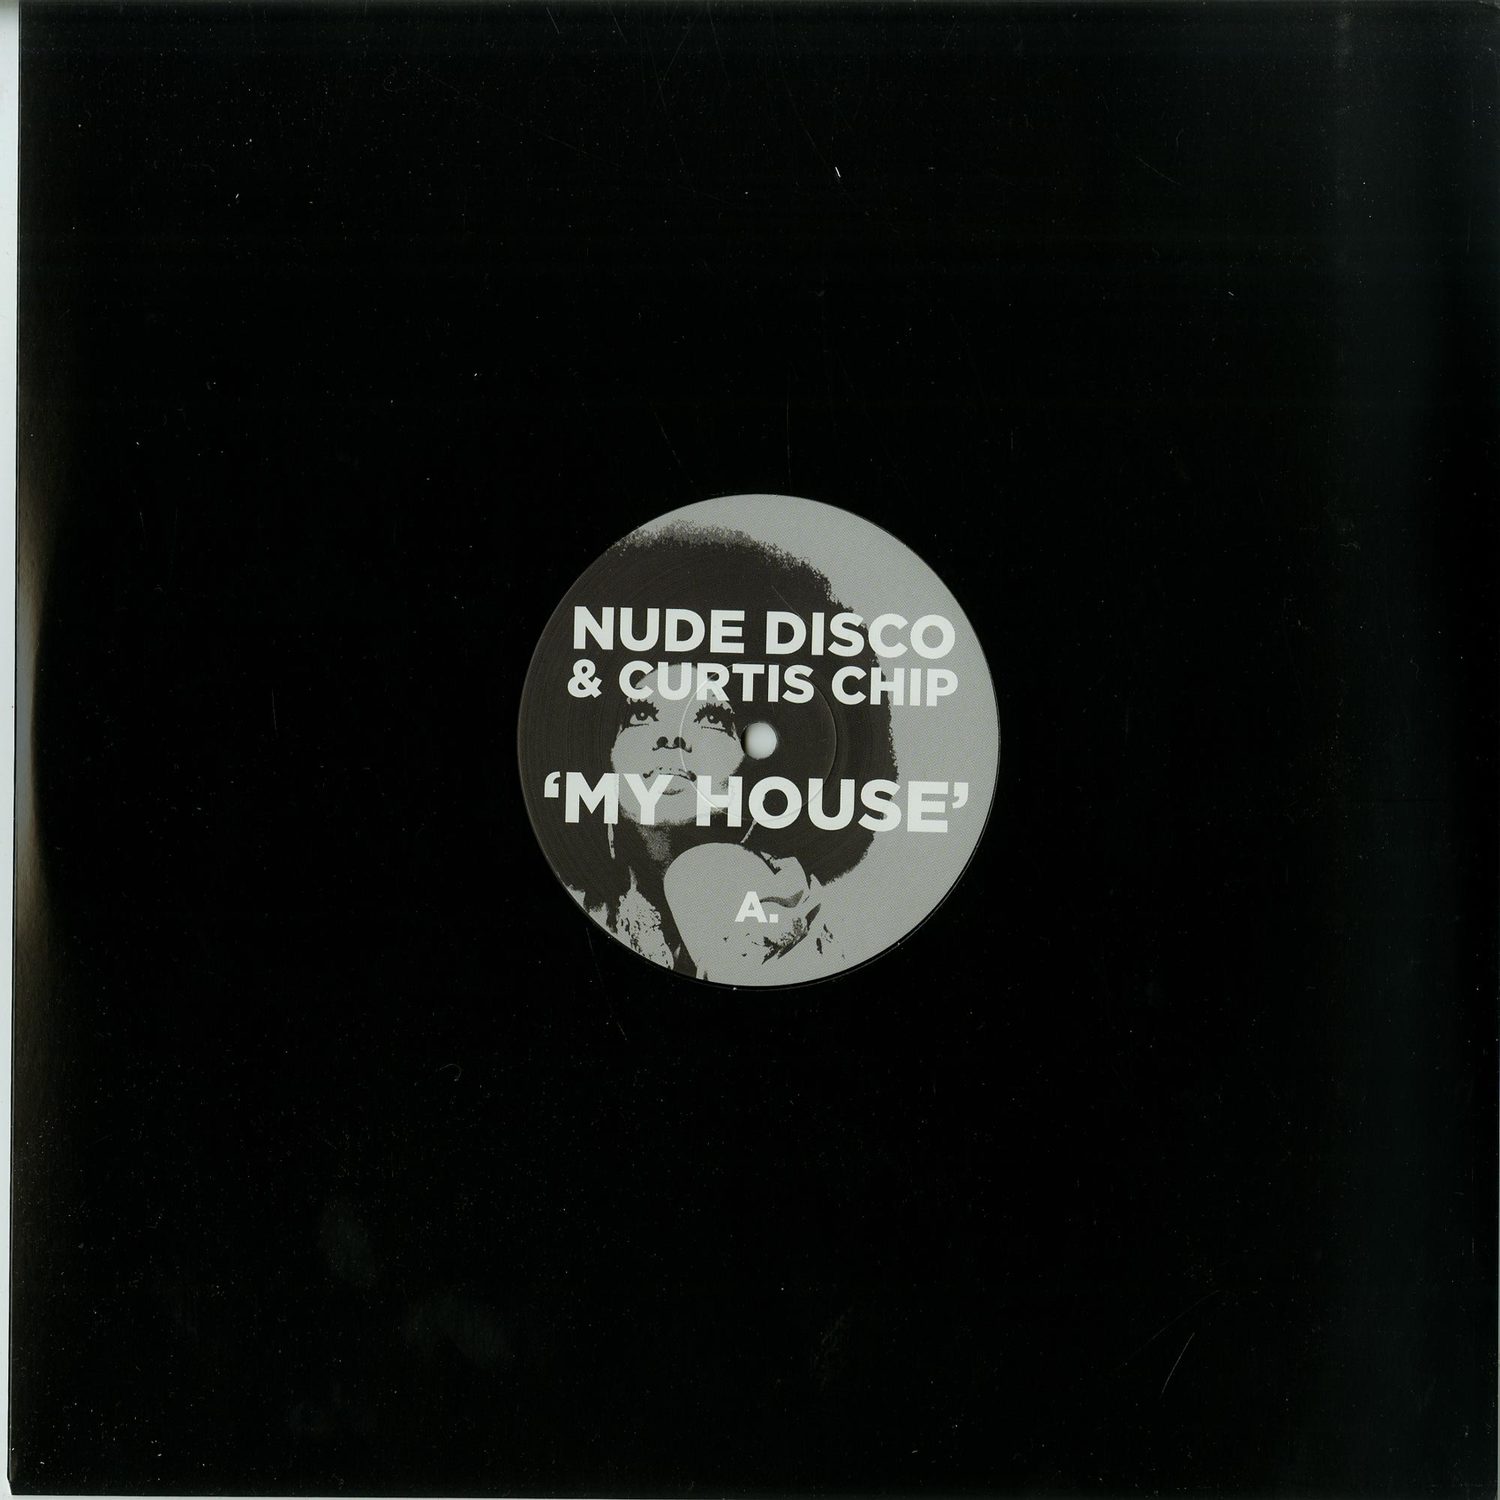 Nude Disco & Curtis Chip - MY HOUSE